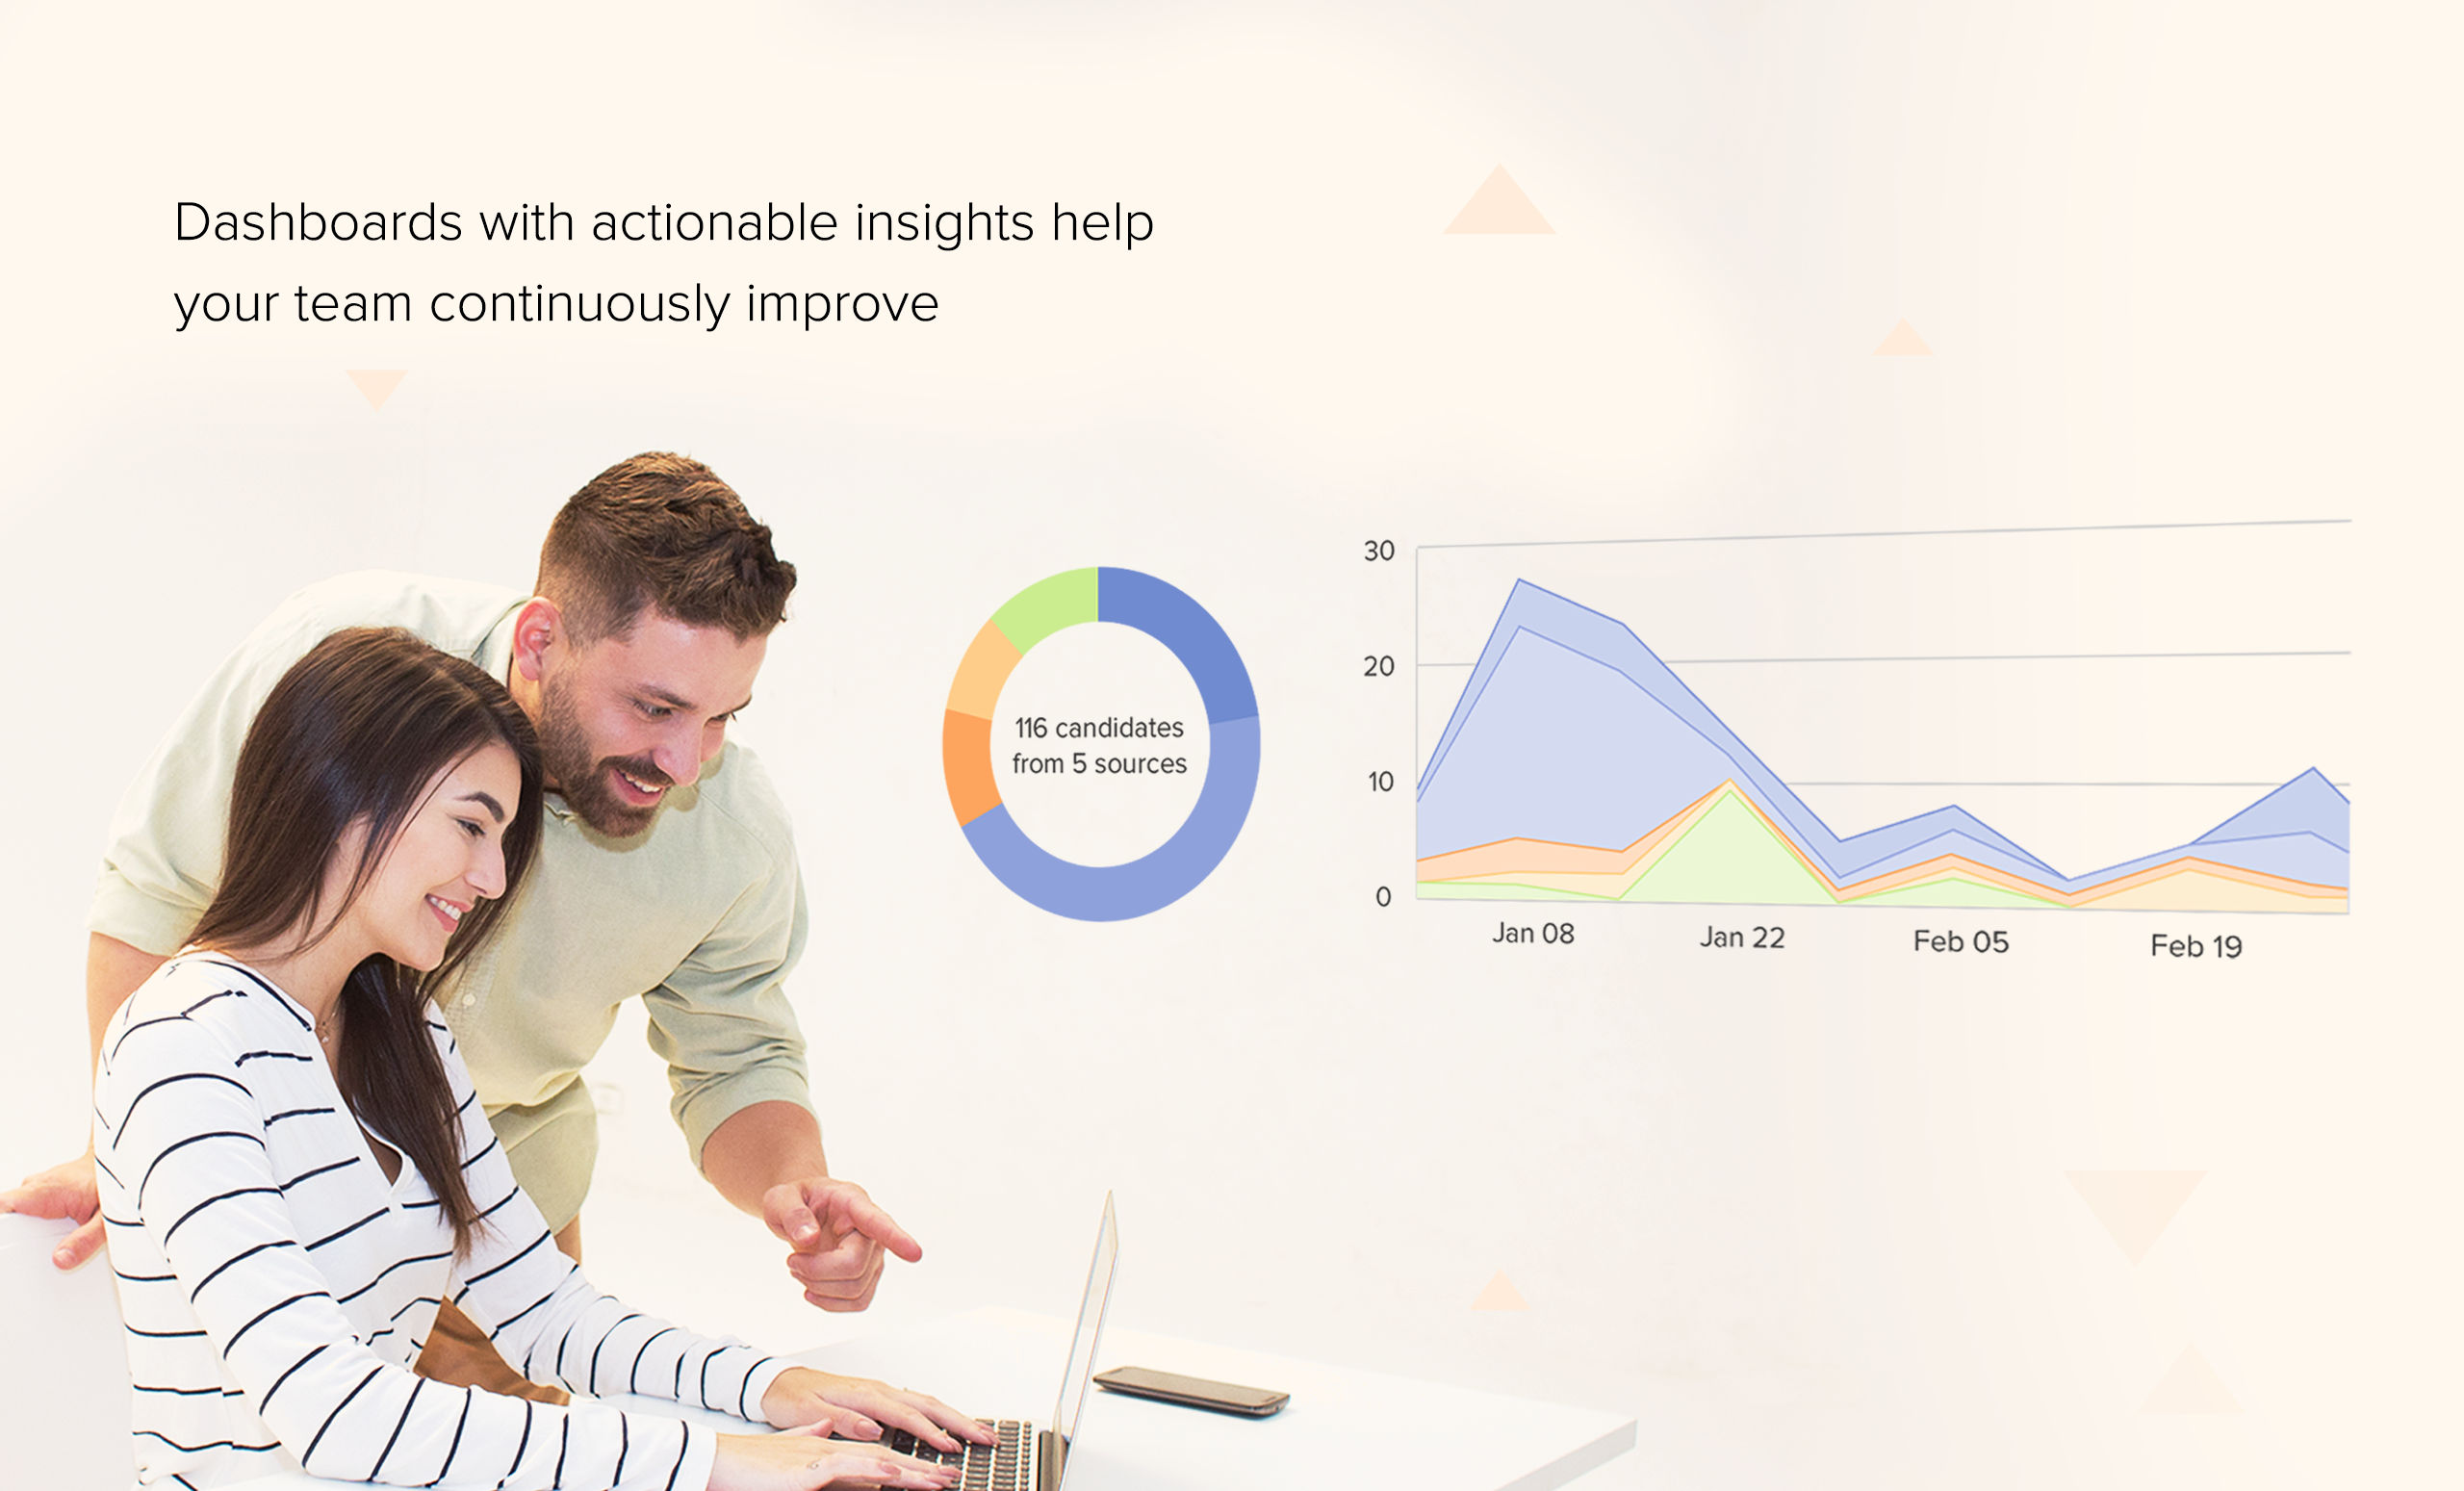 Dashboards with actionable insights help your team continuously improve
